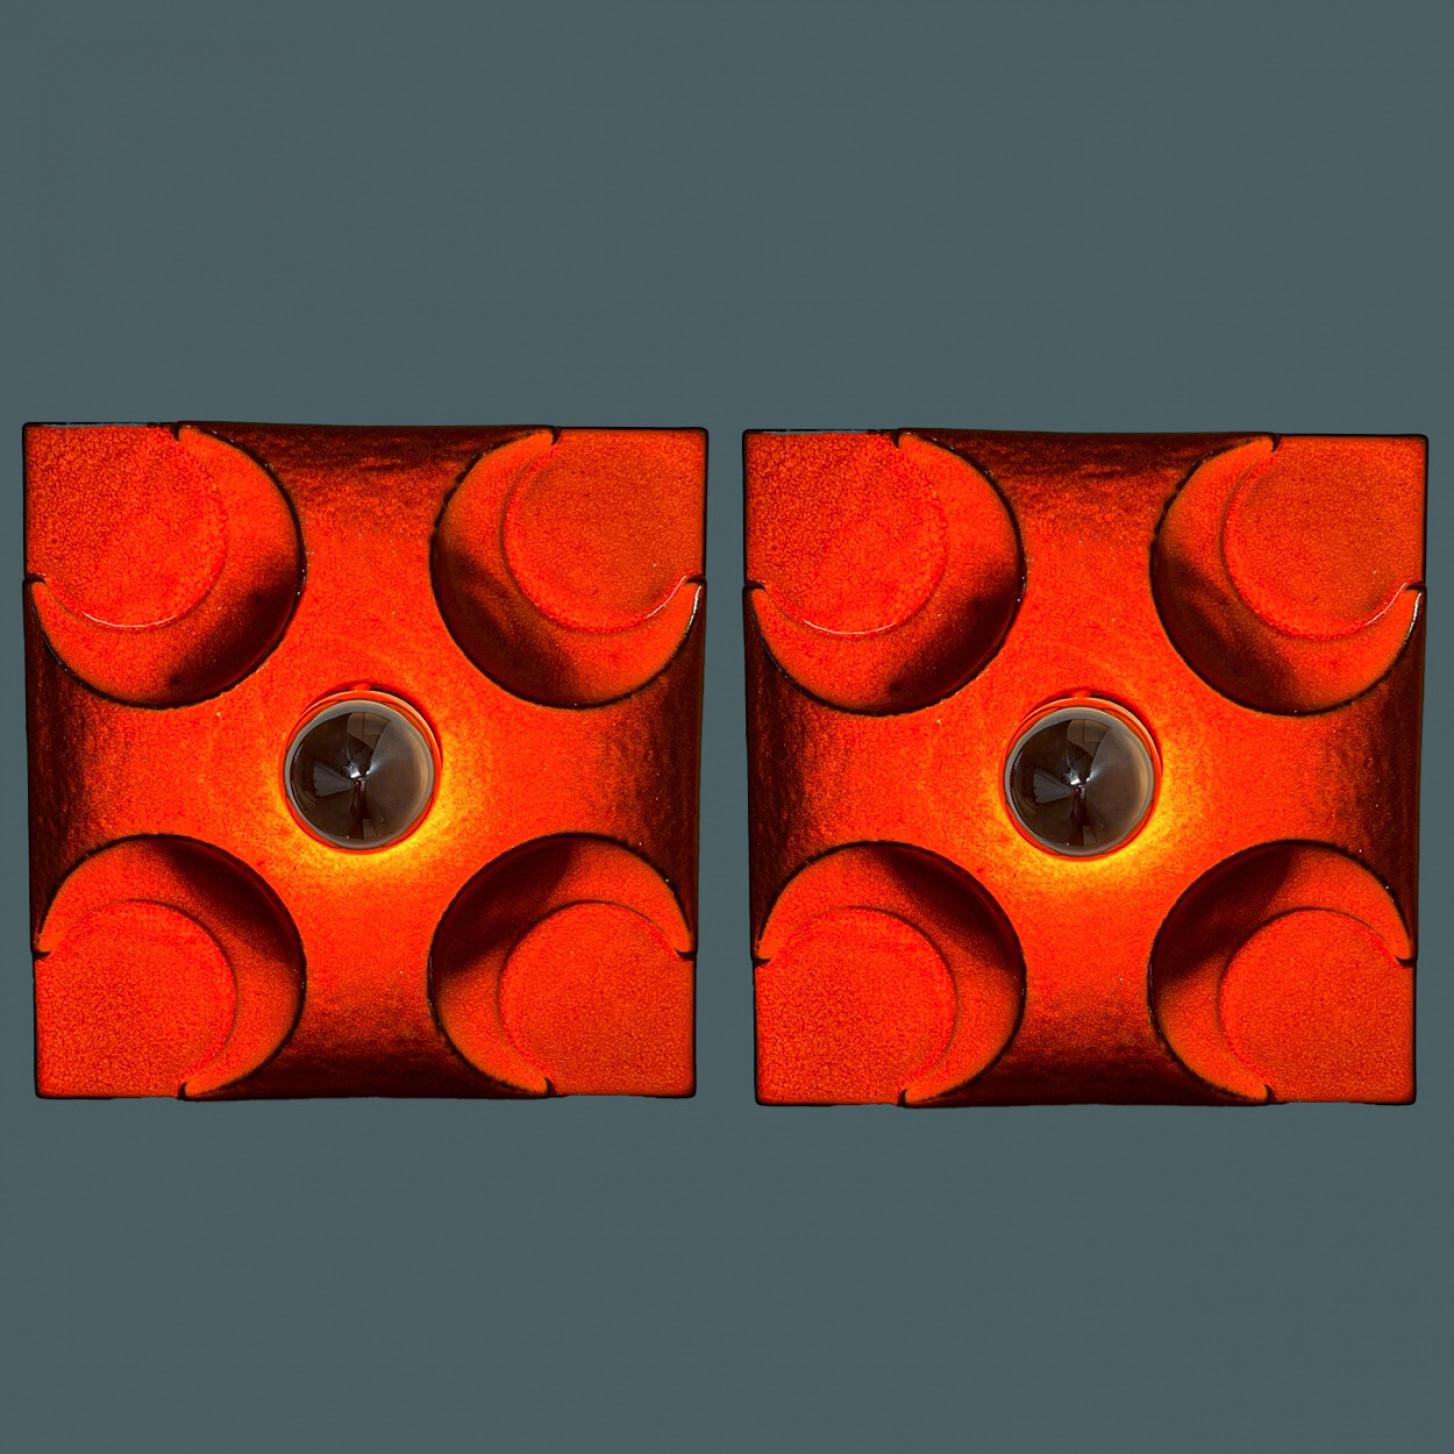 Pair of Orange Square Ceramic Wall Lights, Germany, 1970 For Sale 2